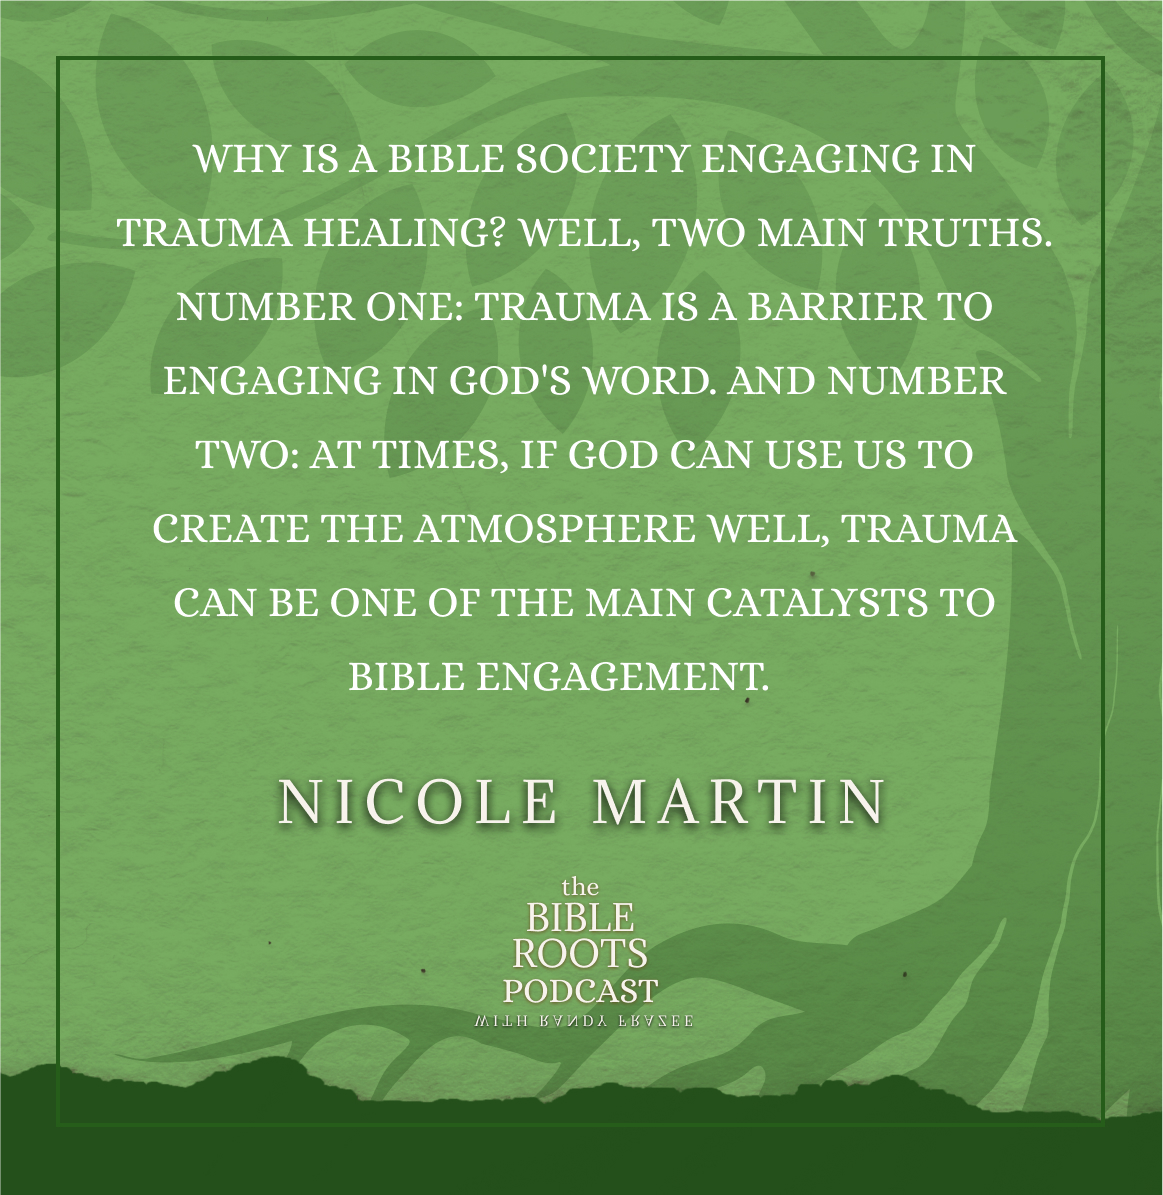 Nicole Martin quote "Why is a Bible society engaging in trauma healing? Well, two main truths. Number one: trauma is a barrier to engaging in God's word. And number two: at times, if God can use us to create the atmosphere well, trauma can be one of the main catalysts to Bible engagement."